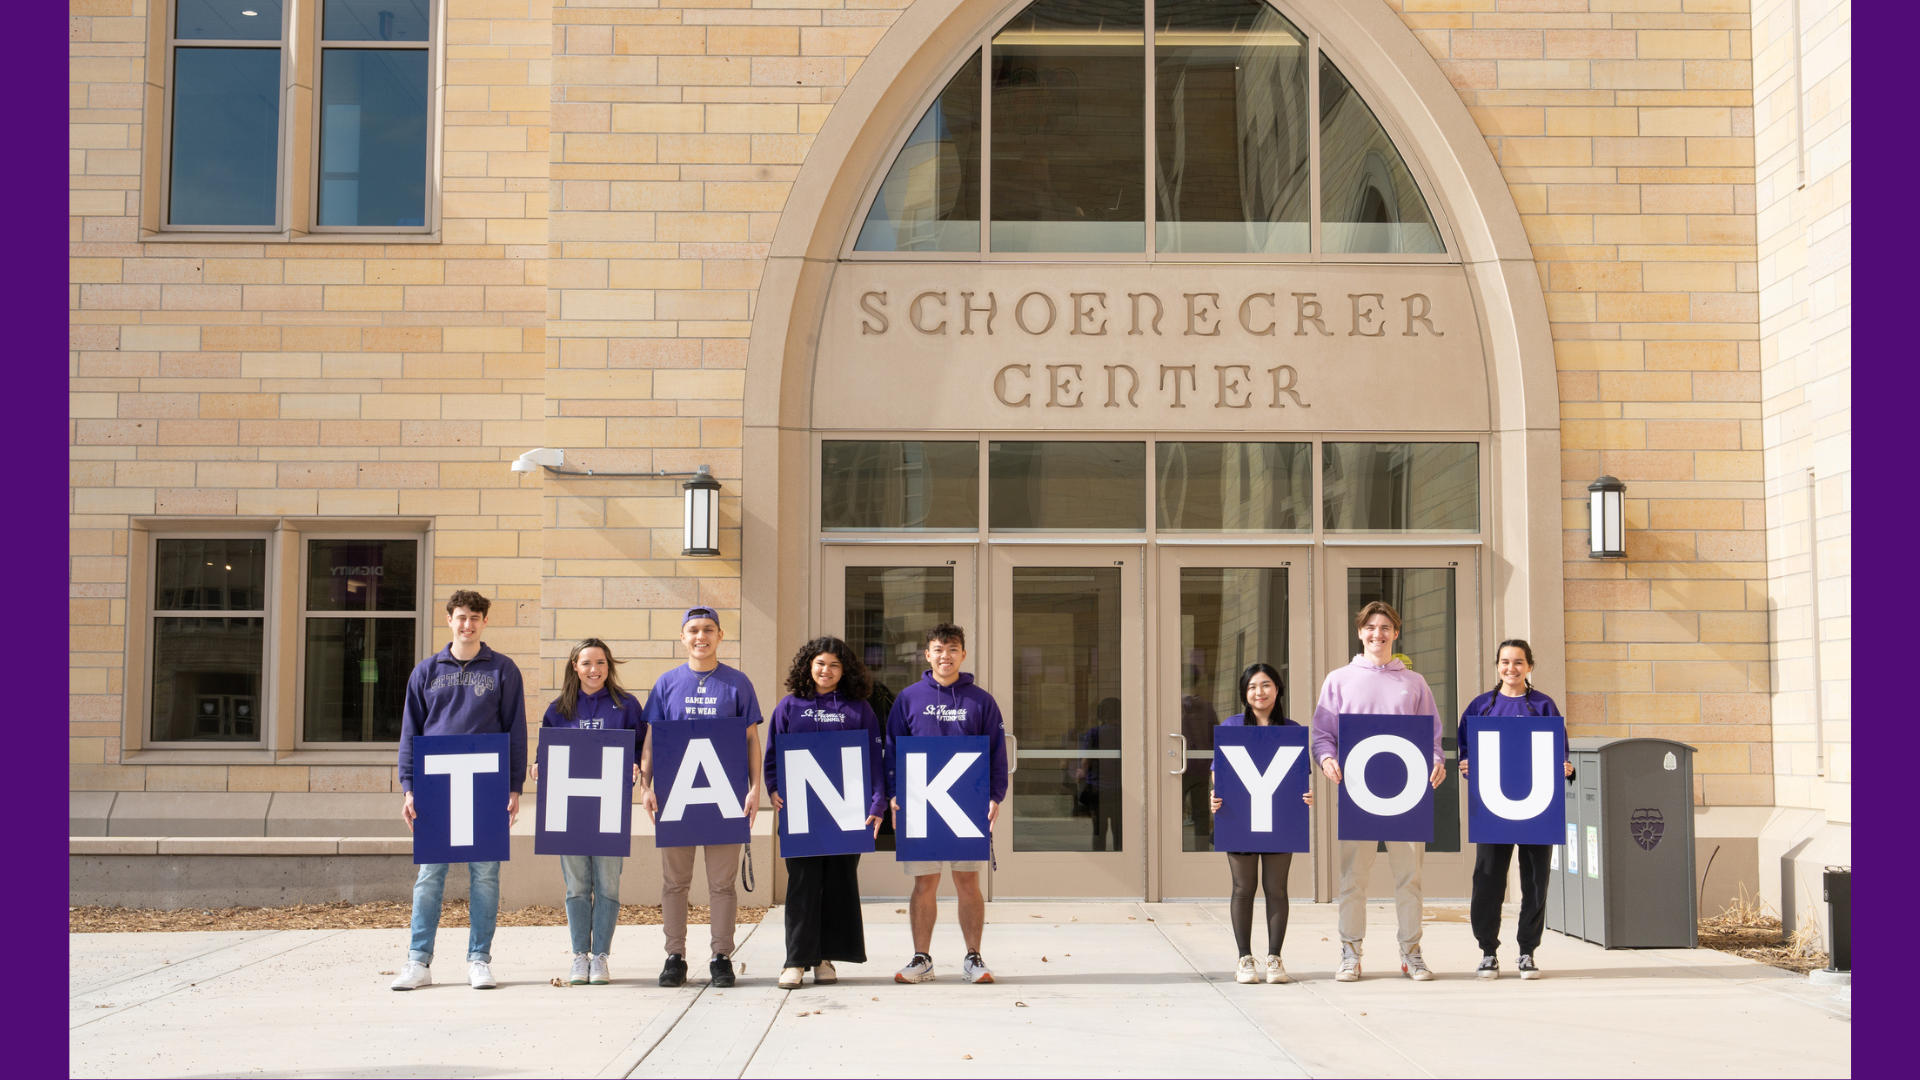 Front doors of the Schoenecker Center with students in purple holding thank you signs